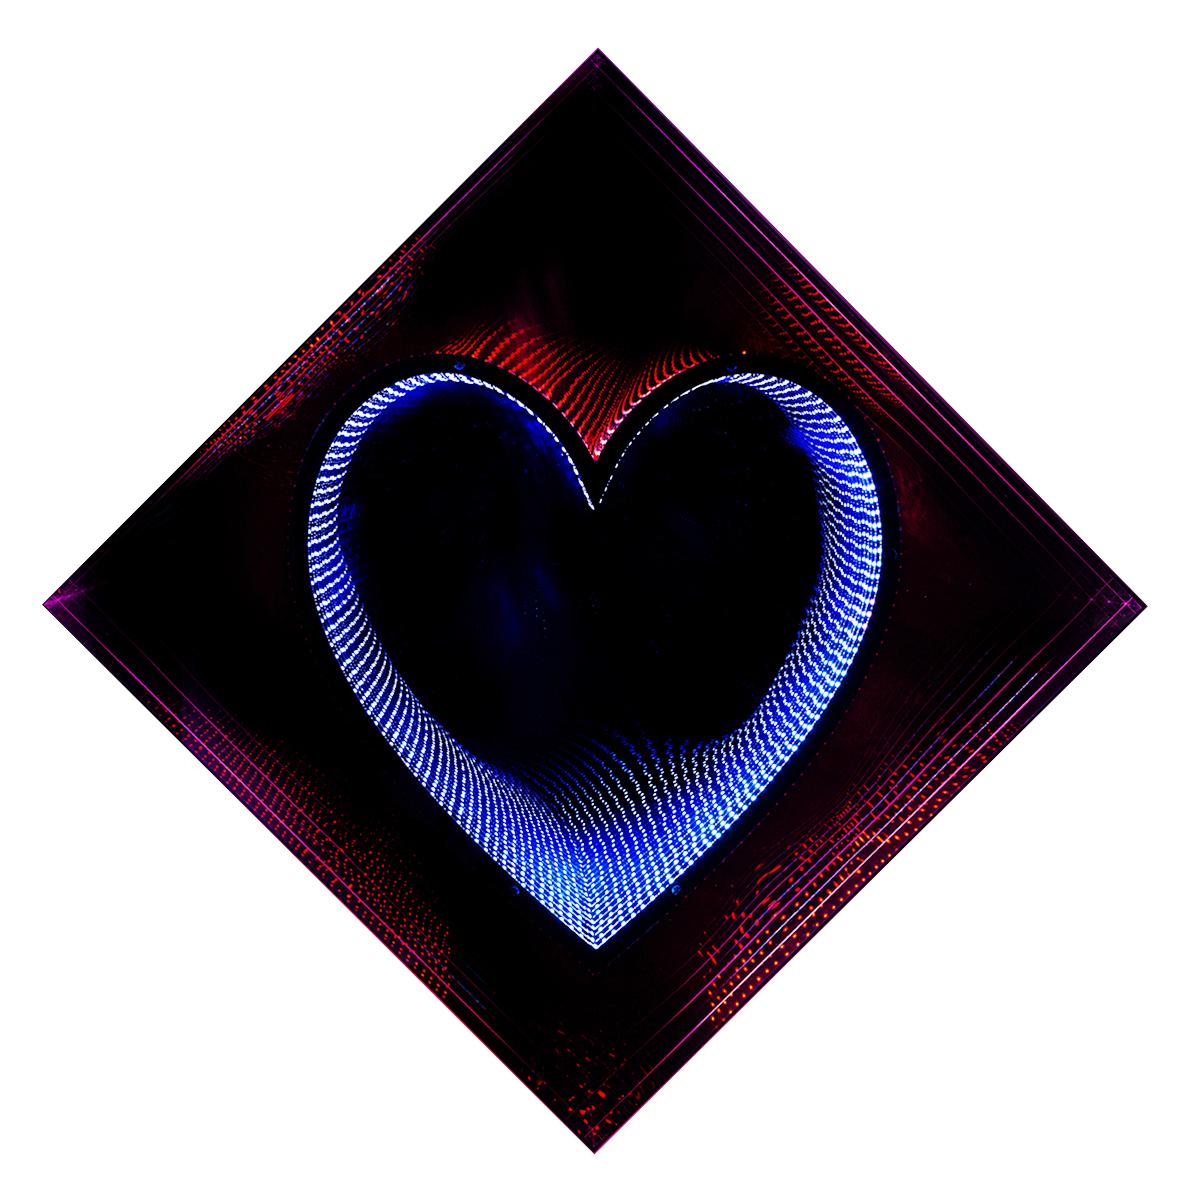 Wall Decoration Heart Light mirror made with LED lights
with mirrored glass and plexiglass creating an infiny mirrored
effect through a heart shape. With colors changing option with
remote control. Exceptional piece by Raphael Fenice.